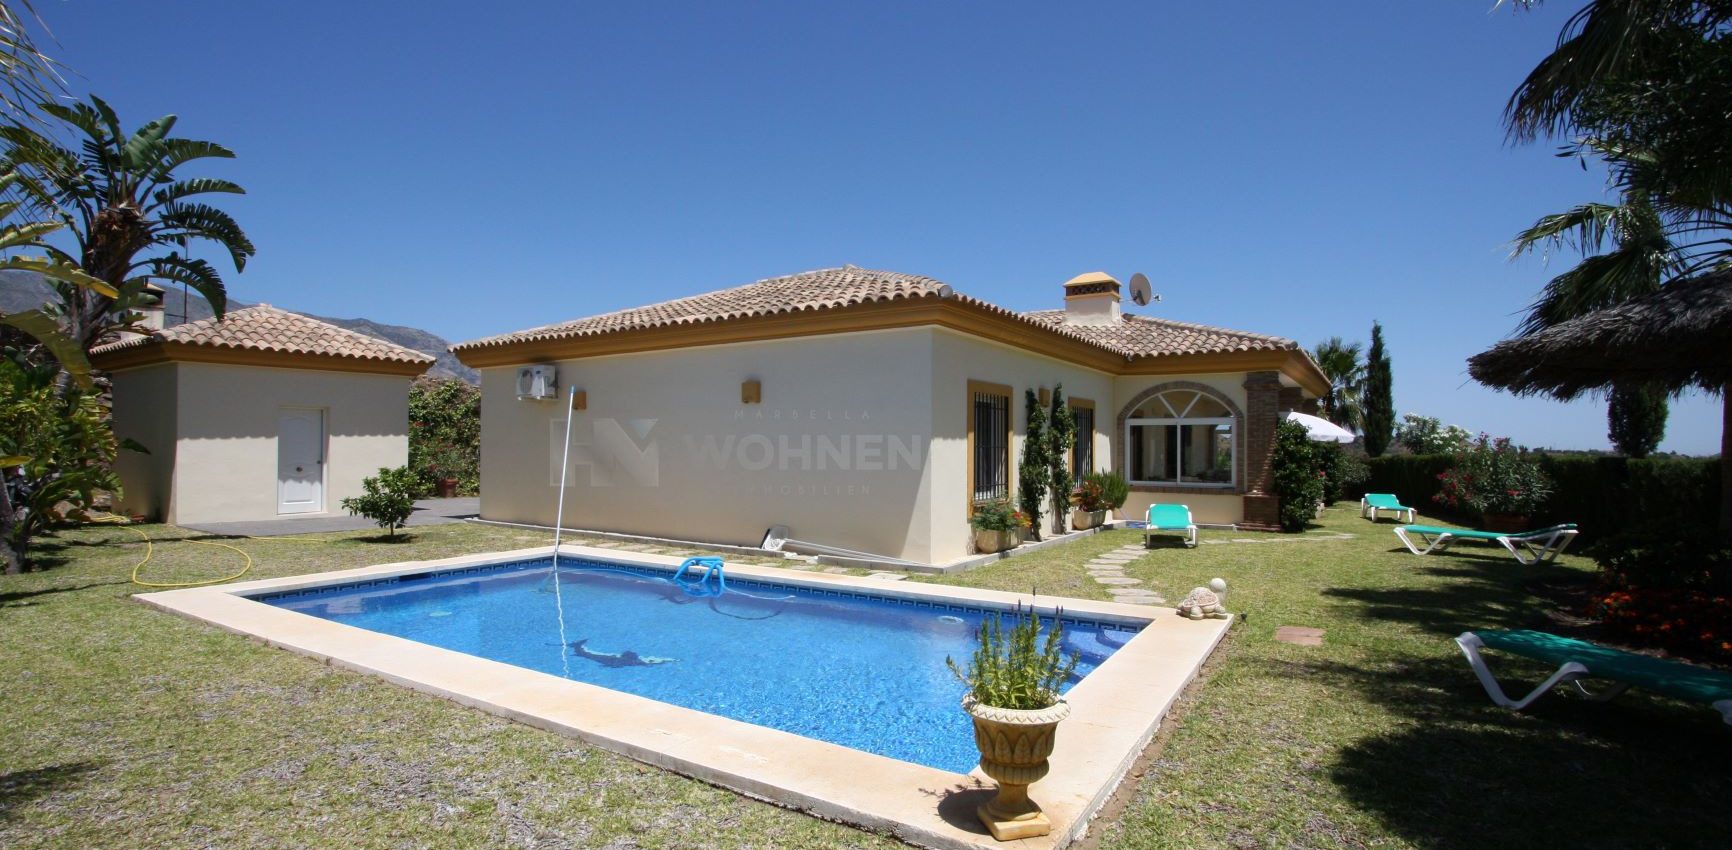 Andalusian villa on a beautiful plot with stunning mountain and countryside views